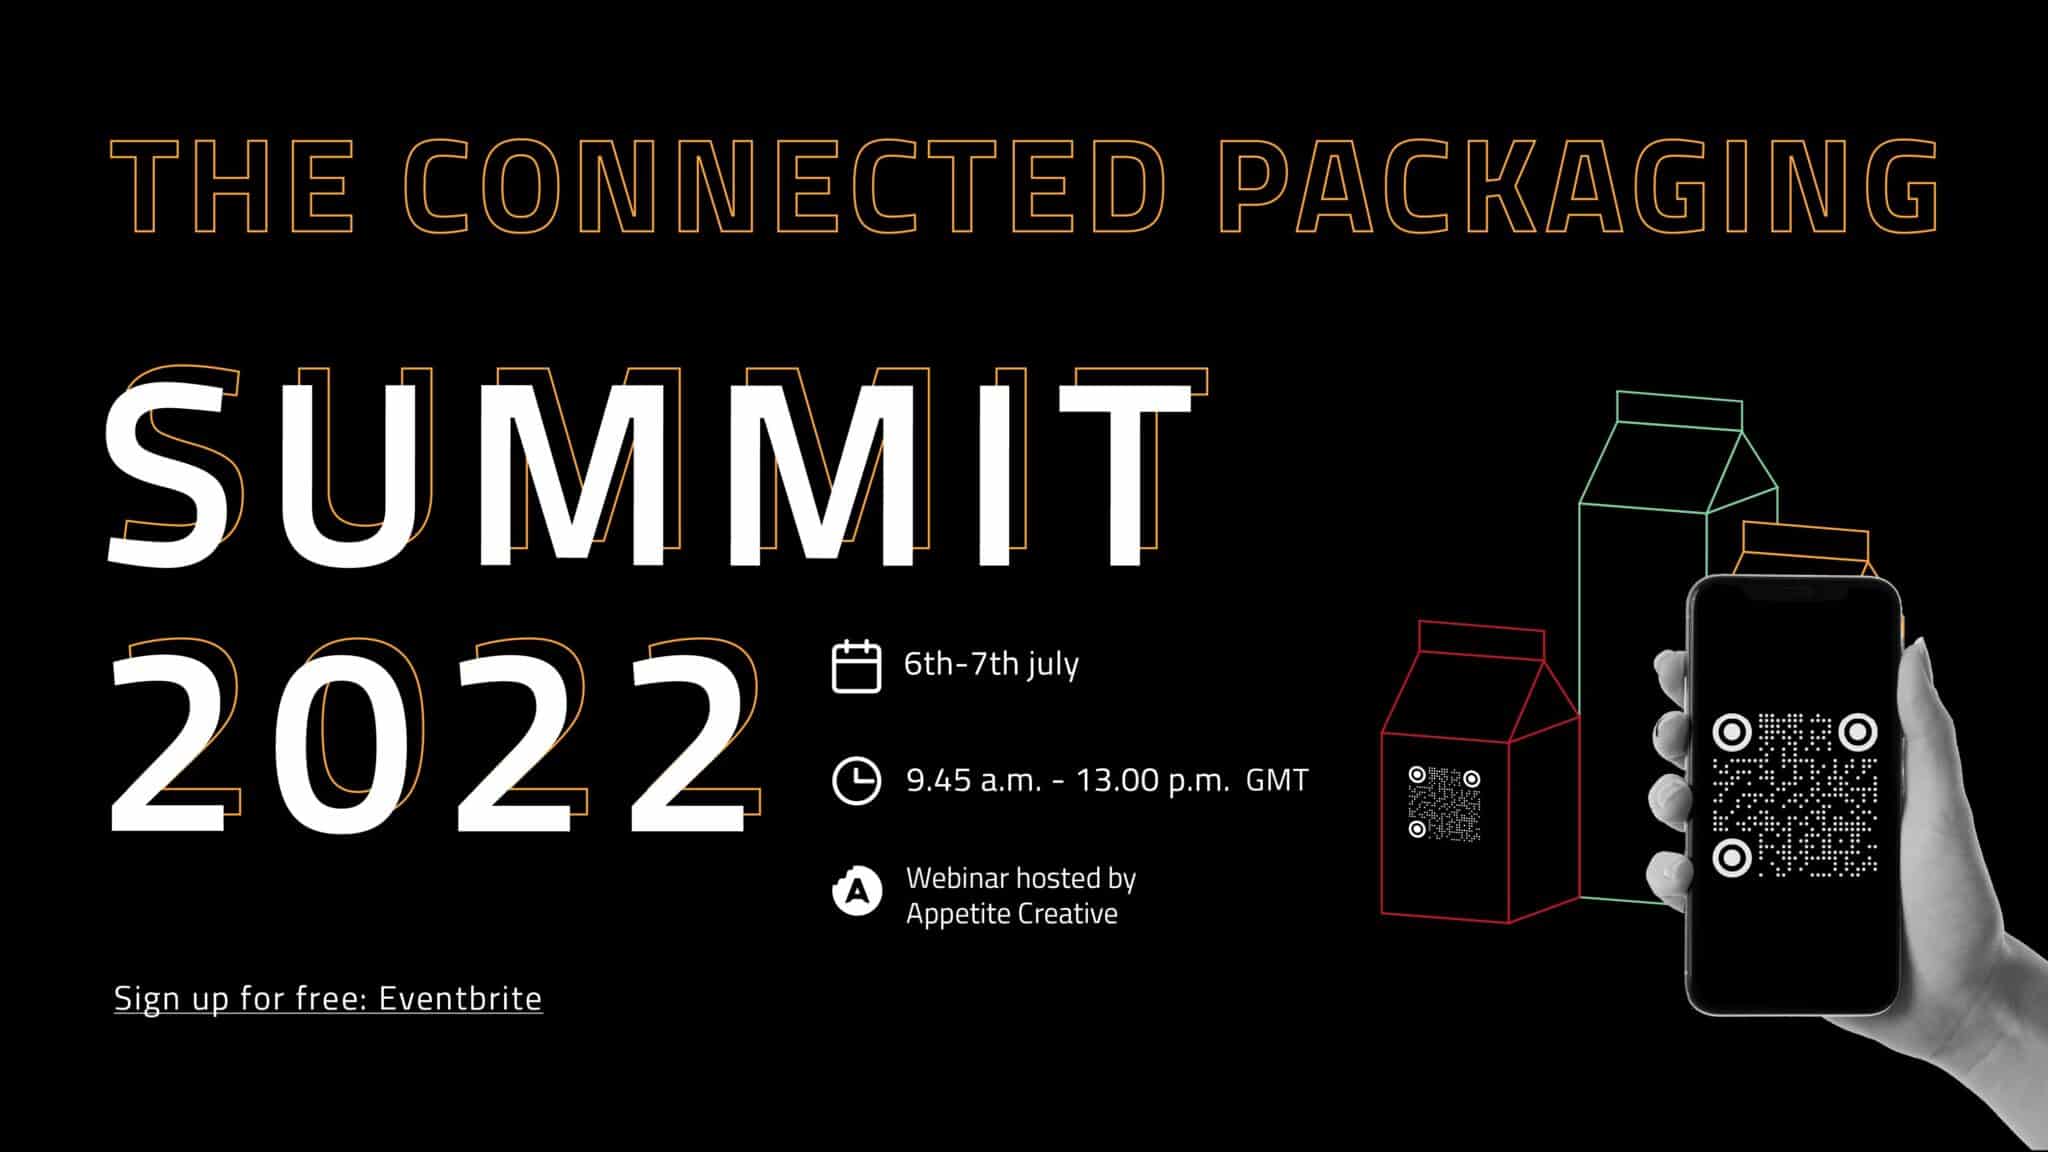 CONNECTED PACKAGING SUMMIT